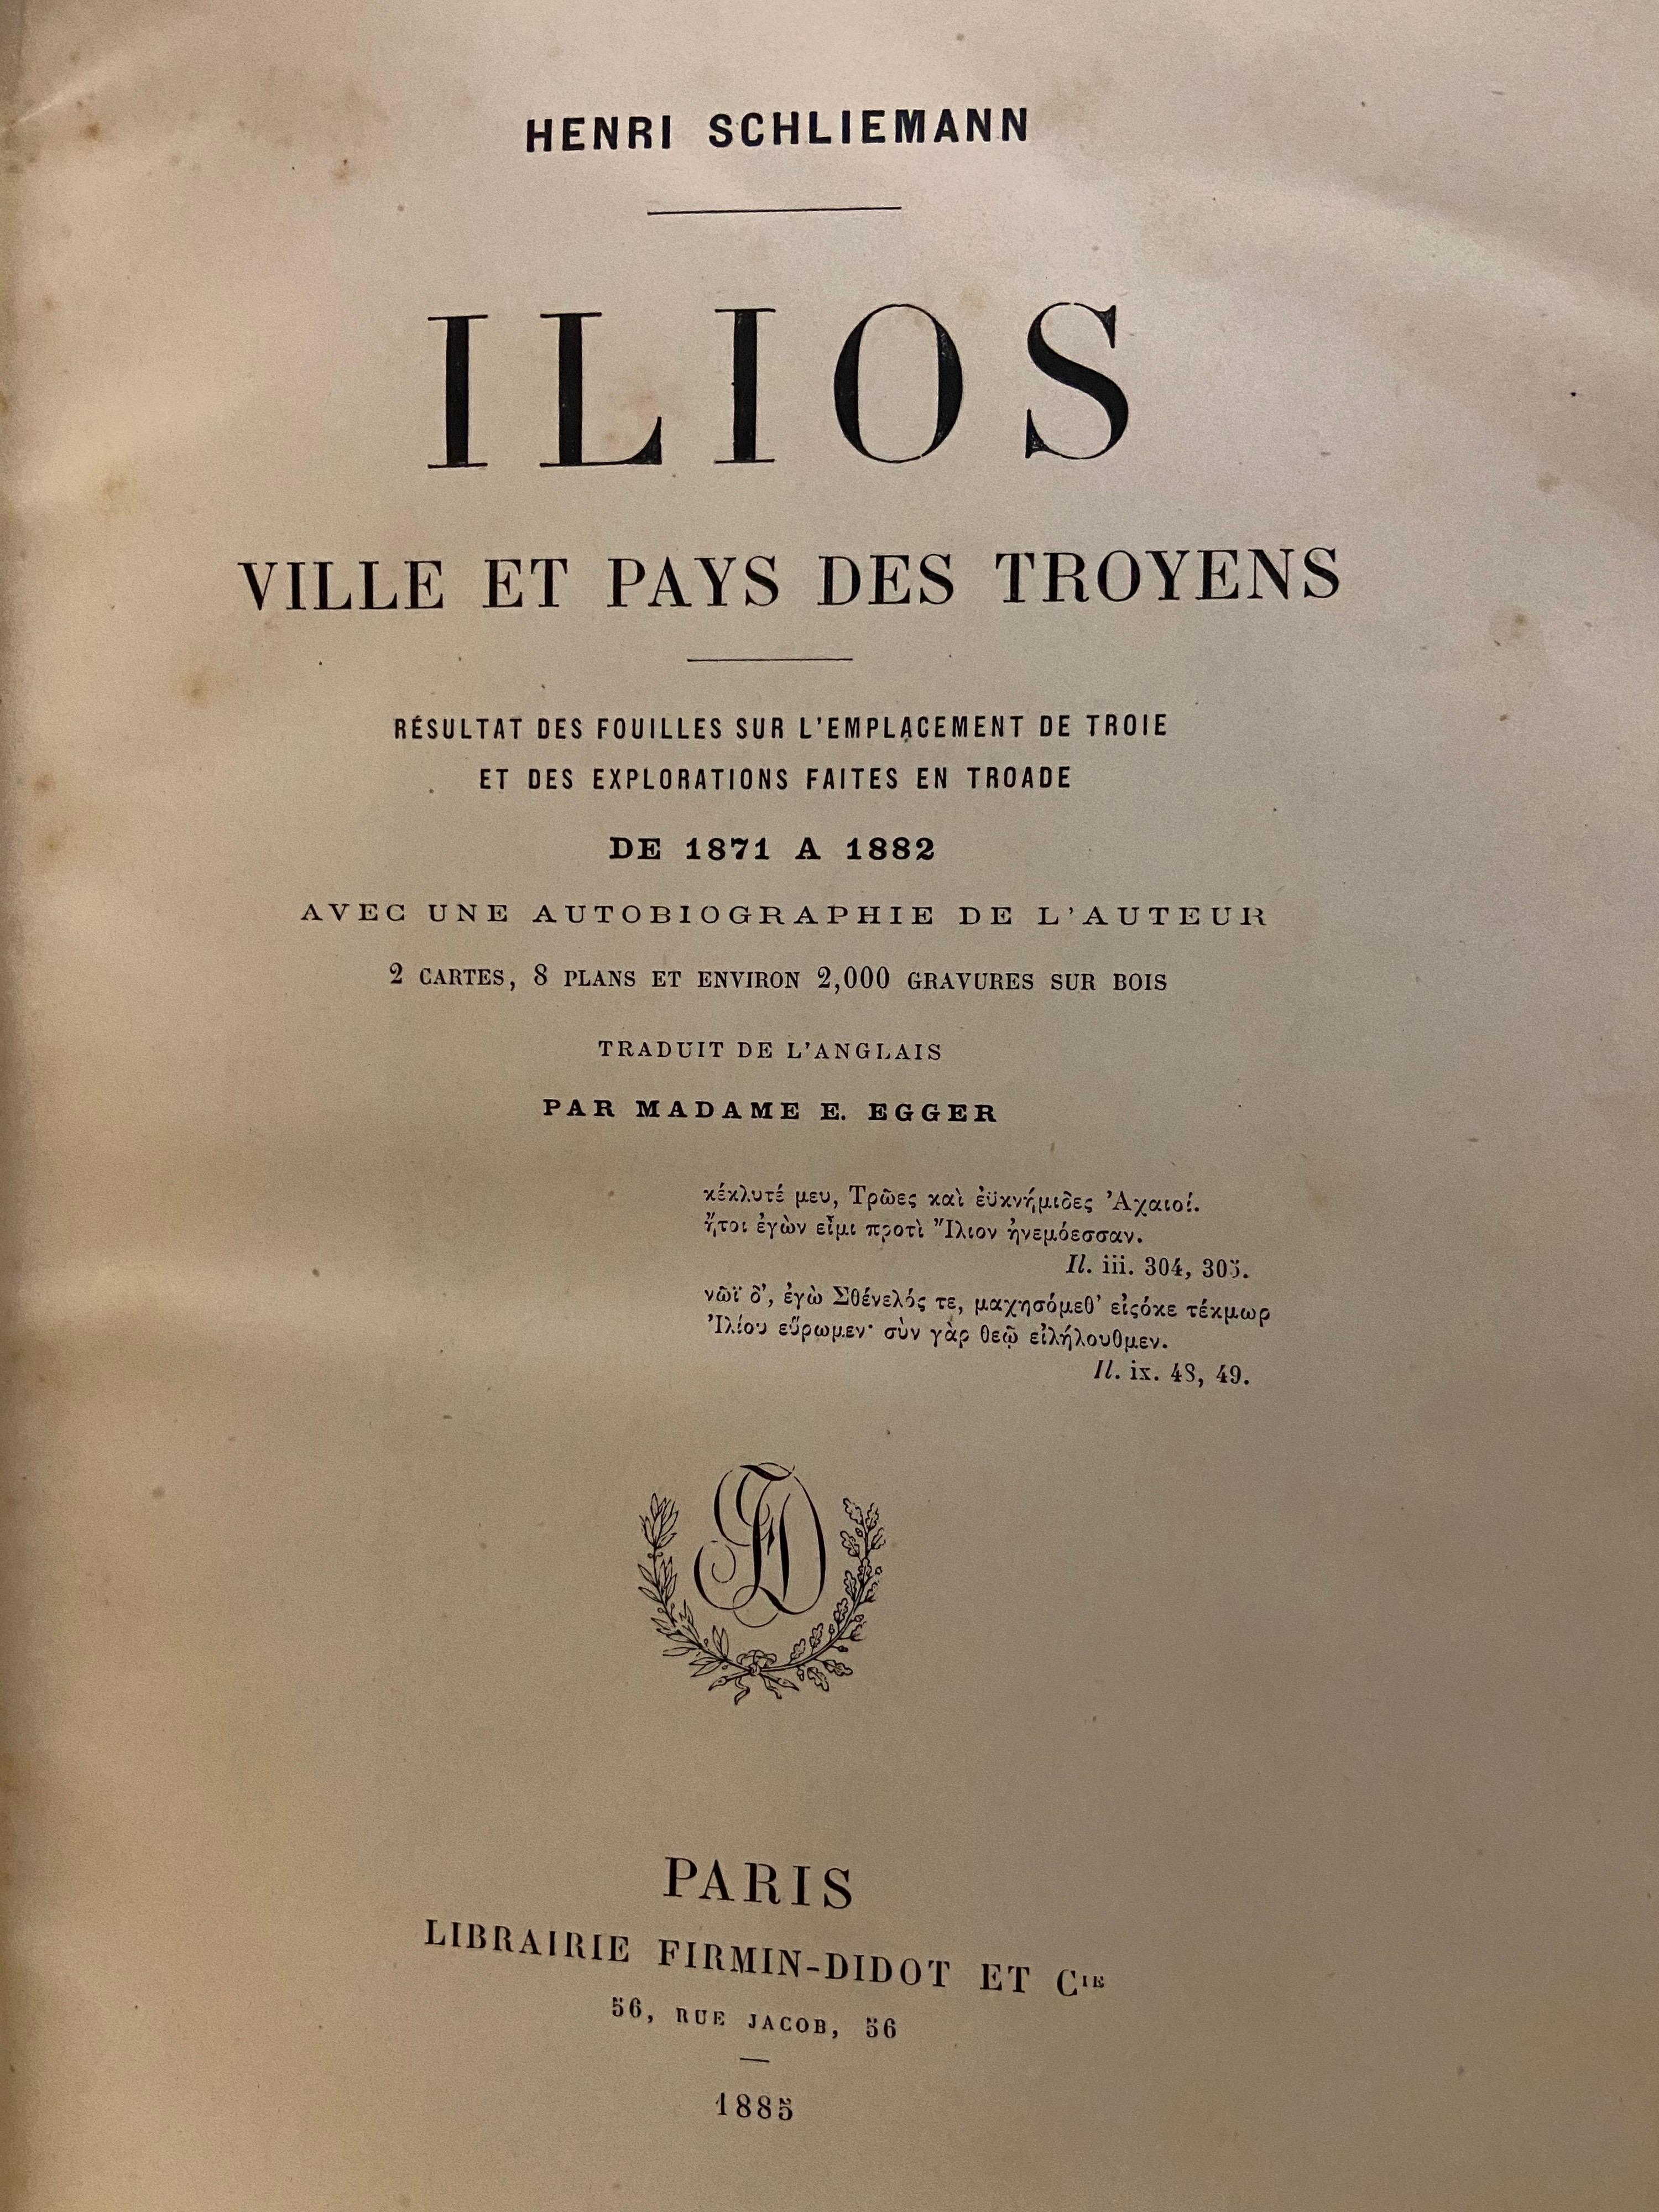 Classical Roman Schliemann, Henry, ILIOS, The City and the Country of the Troyans, 1885 Paris